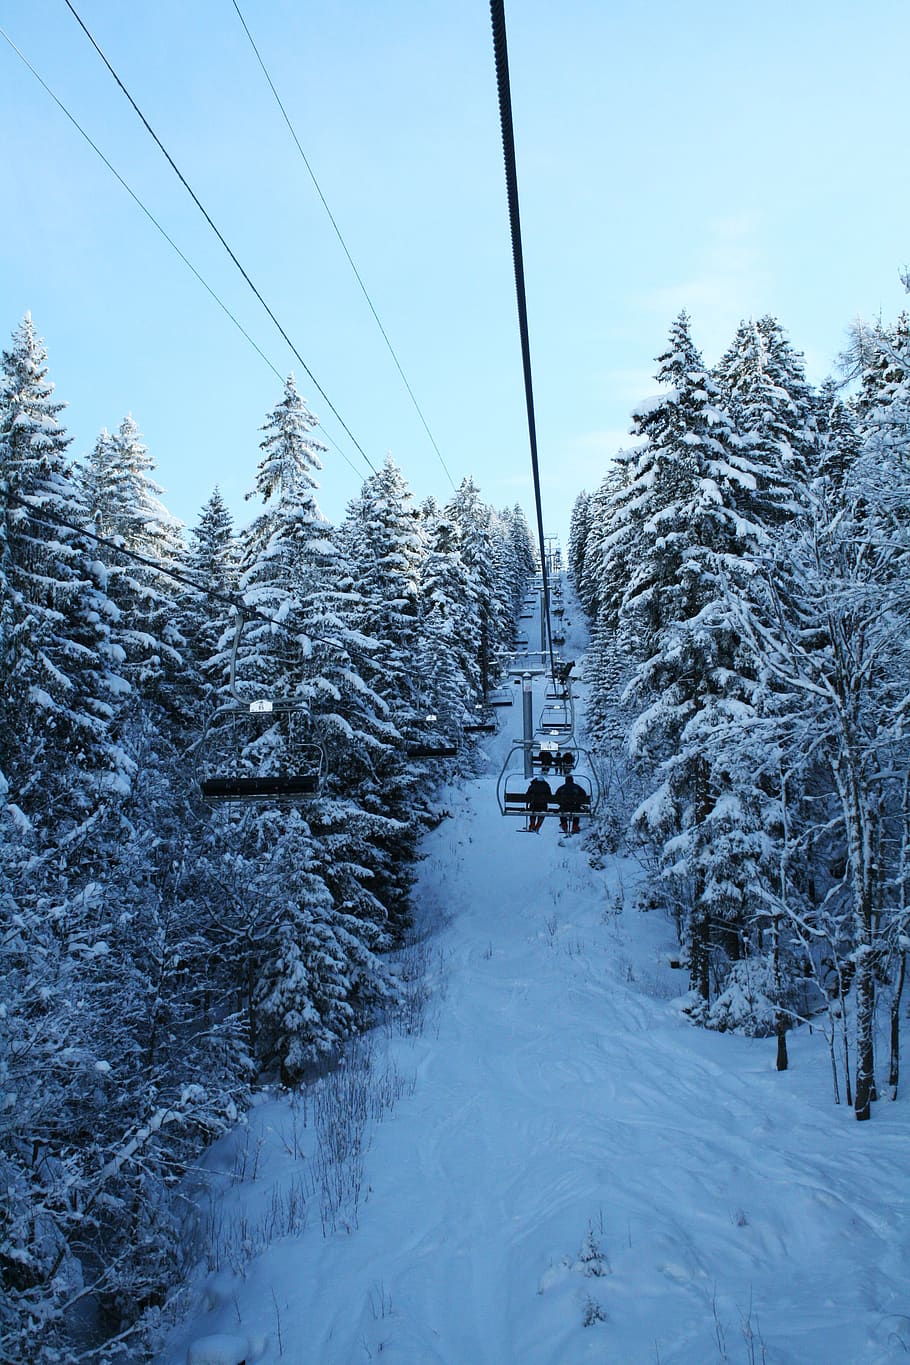 french-speaking switzerland, snow, trees, wintry, cold, winter, sun, gondola, cold temperature, tree